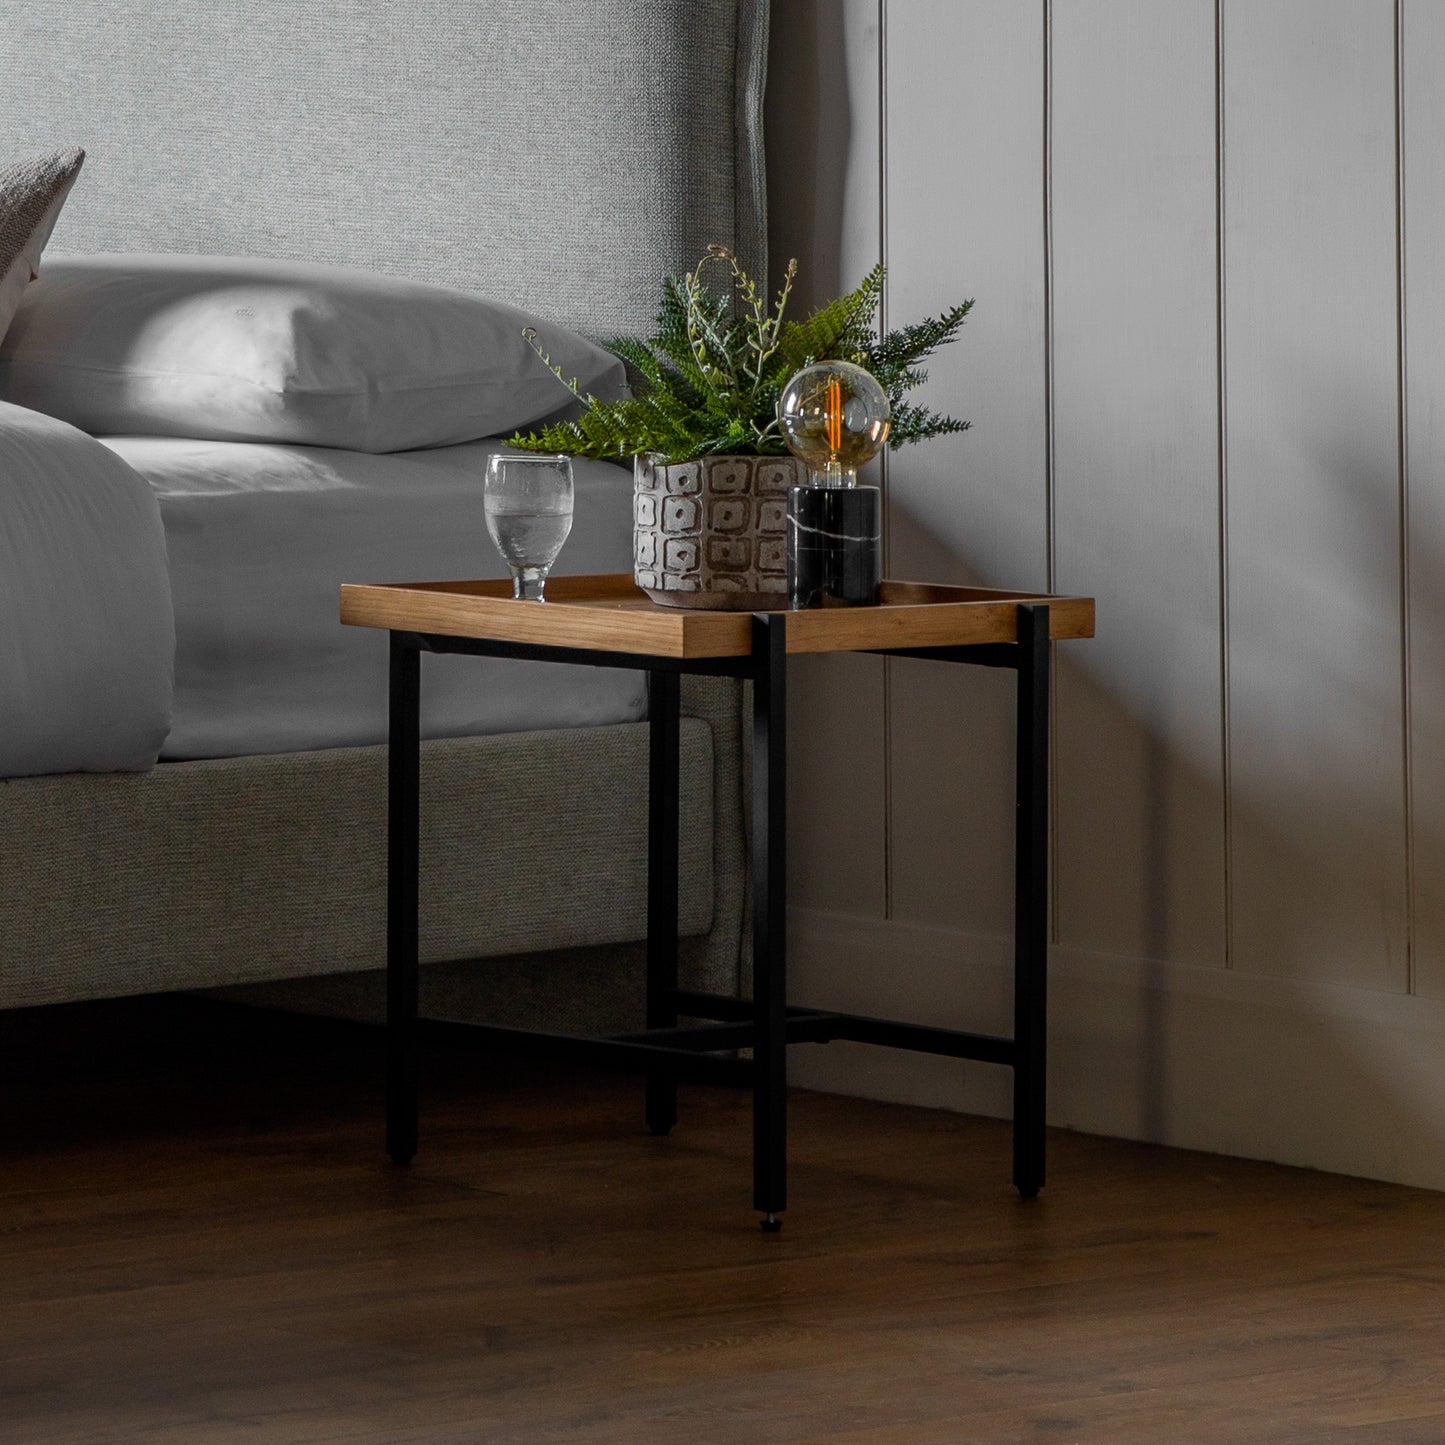 A Torrington Side Table 460x500x500mm from Kikiathome.co.uk, perfect for interior decor.